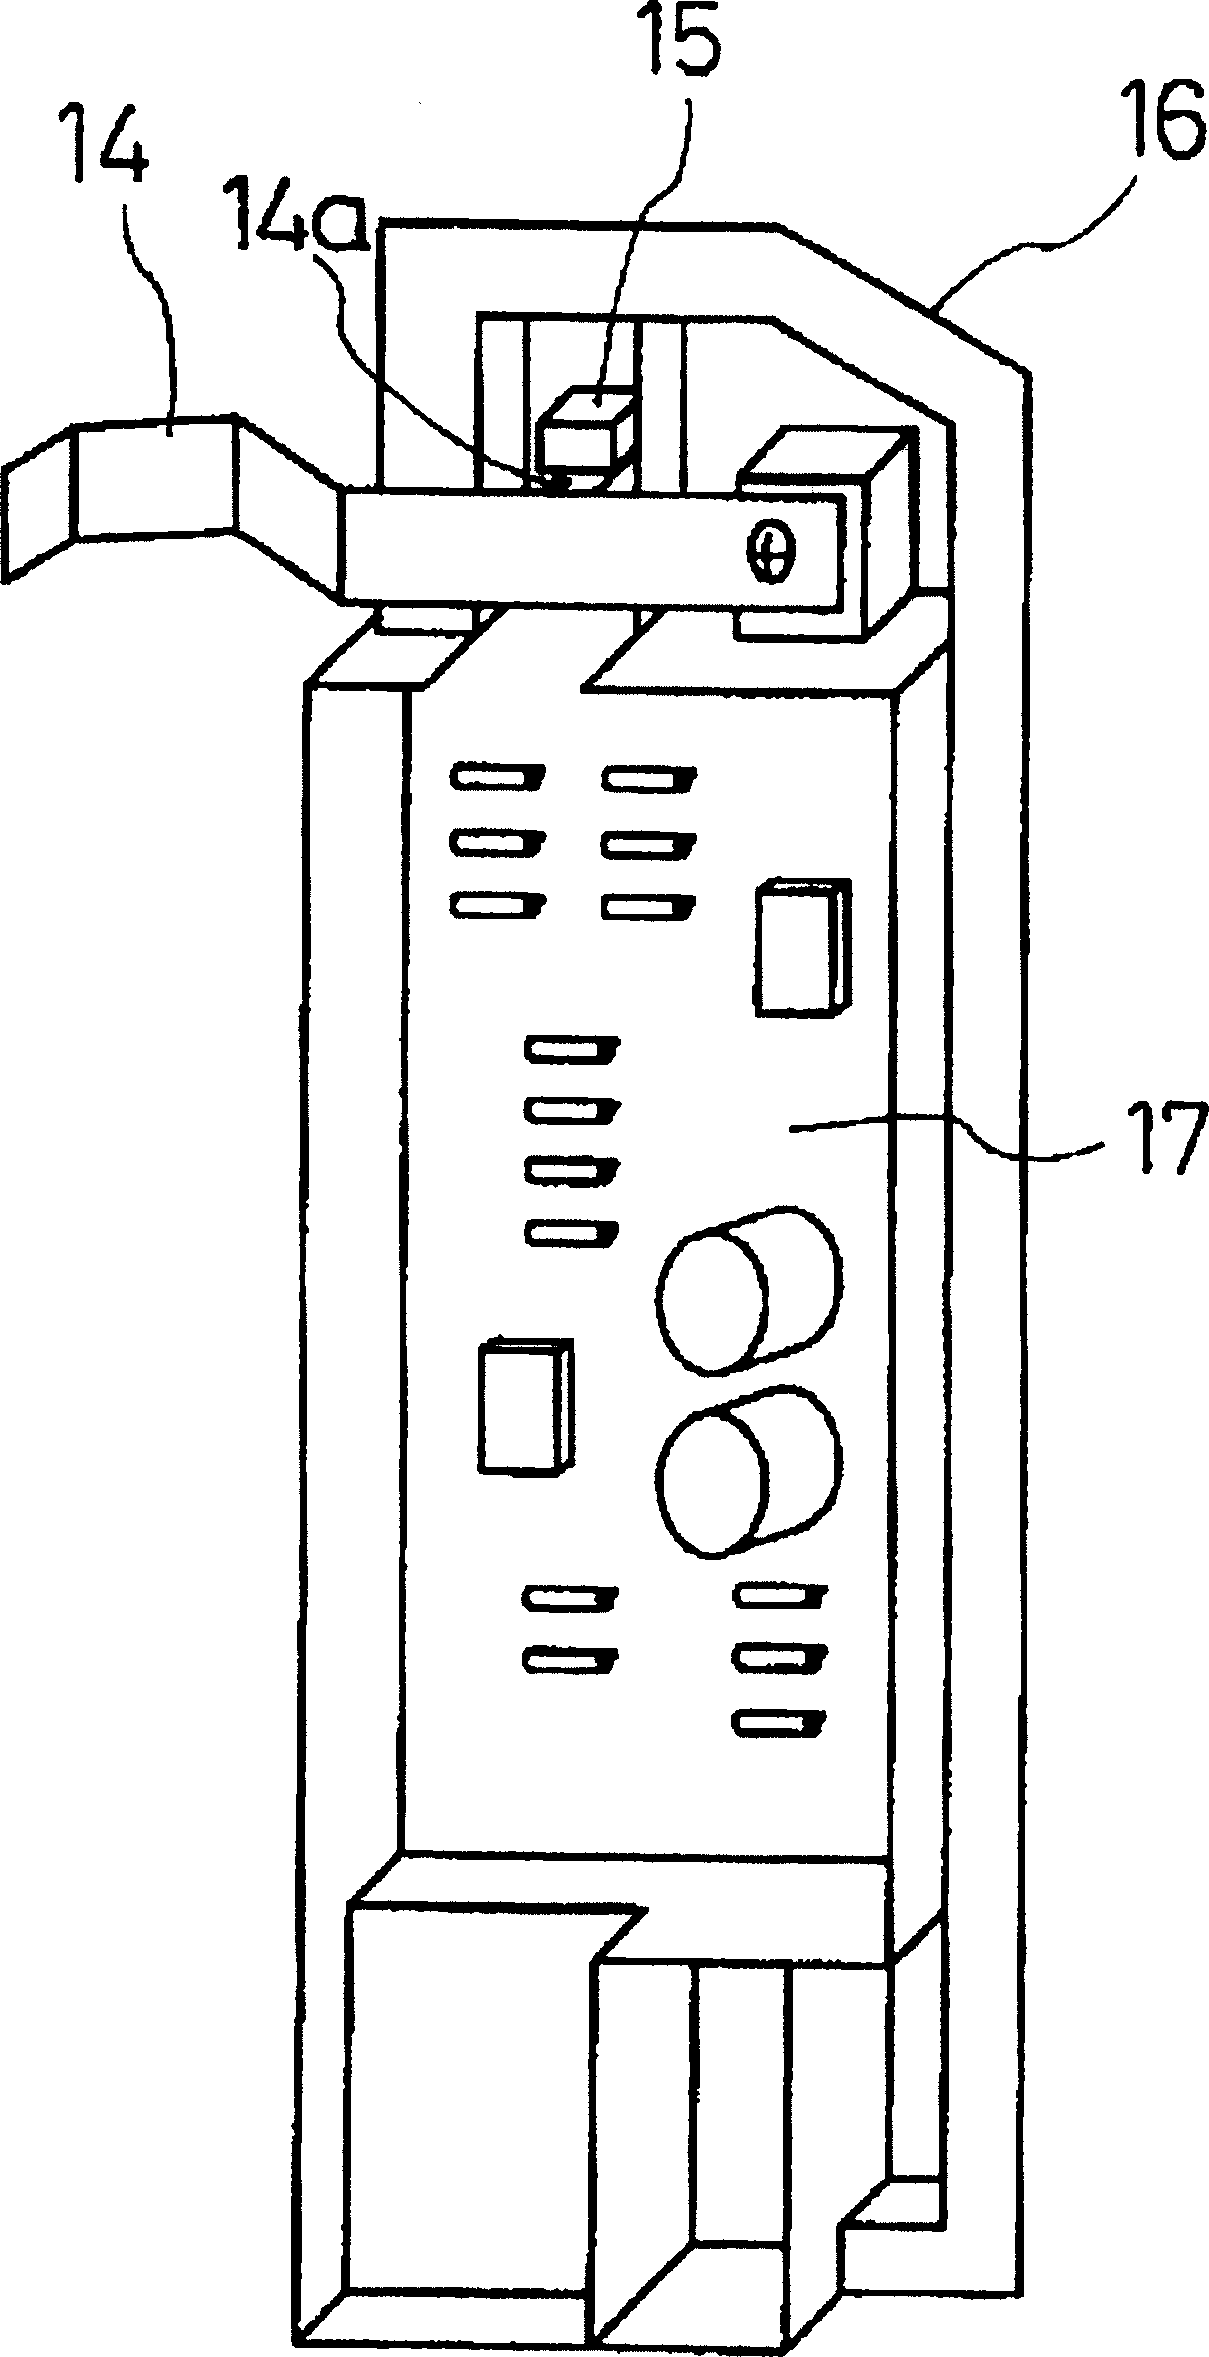 Apparatus and method for detecting imbalance in washing machines